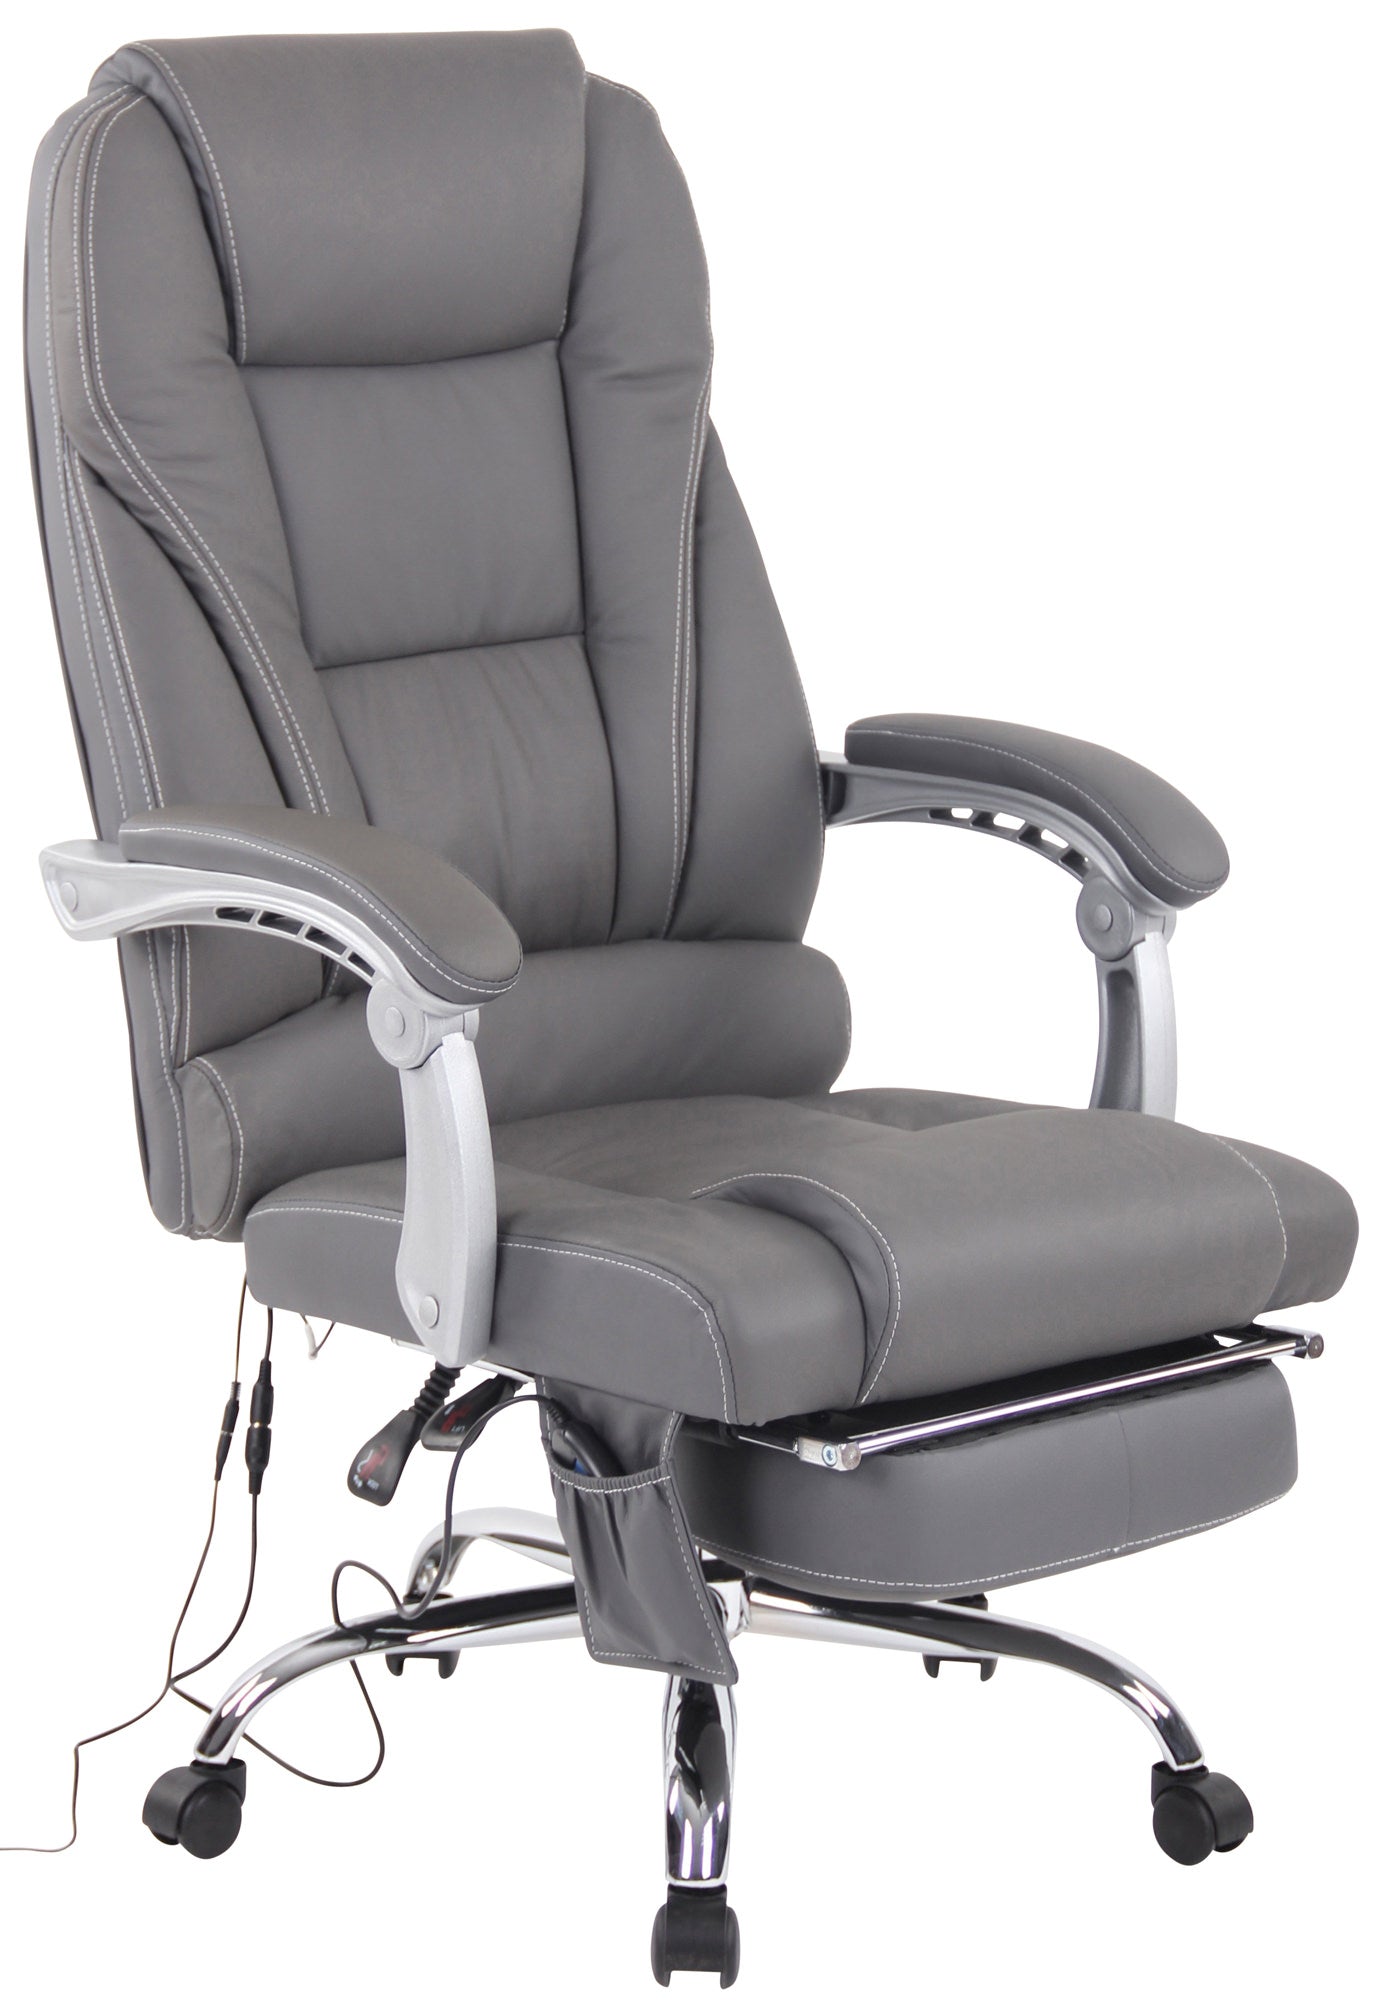 bureaustoel_pacific_real_leather_with_massage_function_317767